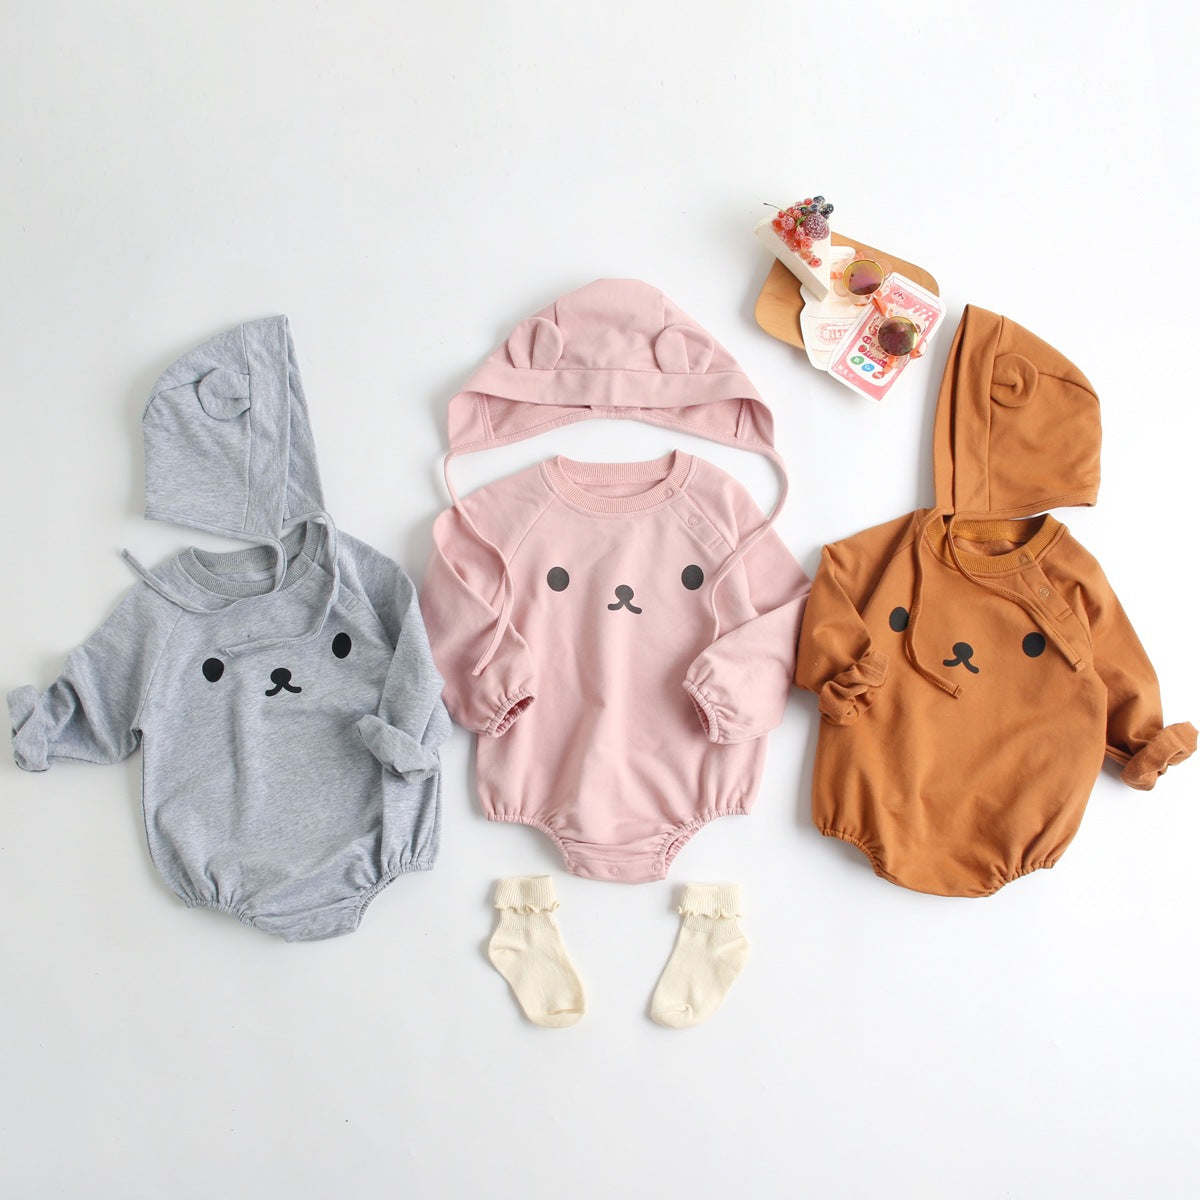 Baby 1pcs Cartoon Print Pattern Long Sleeved Cotton Triangle Onesies With Hat